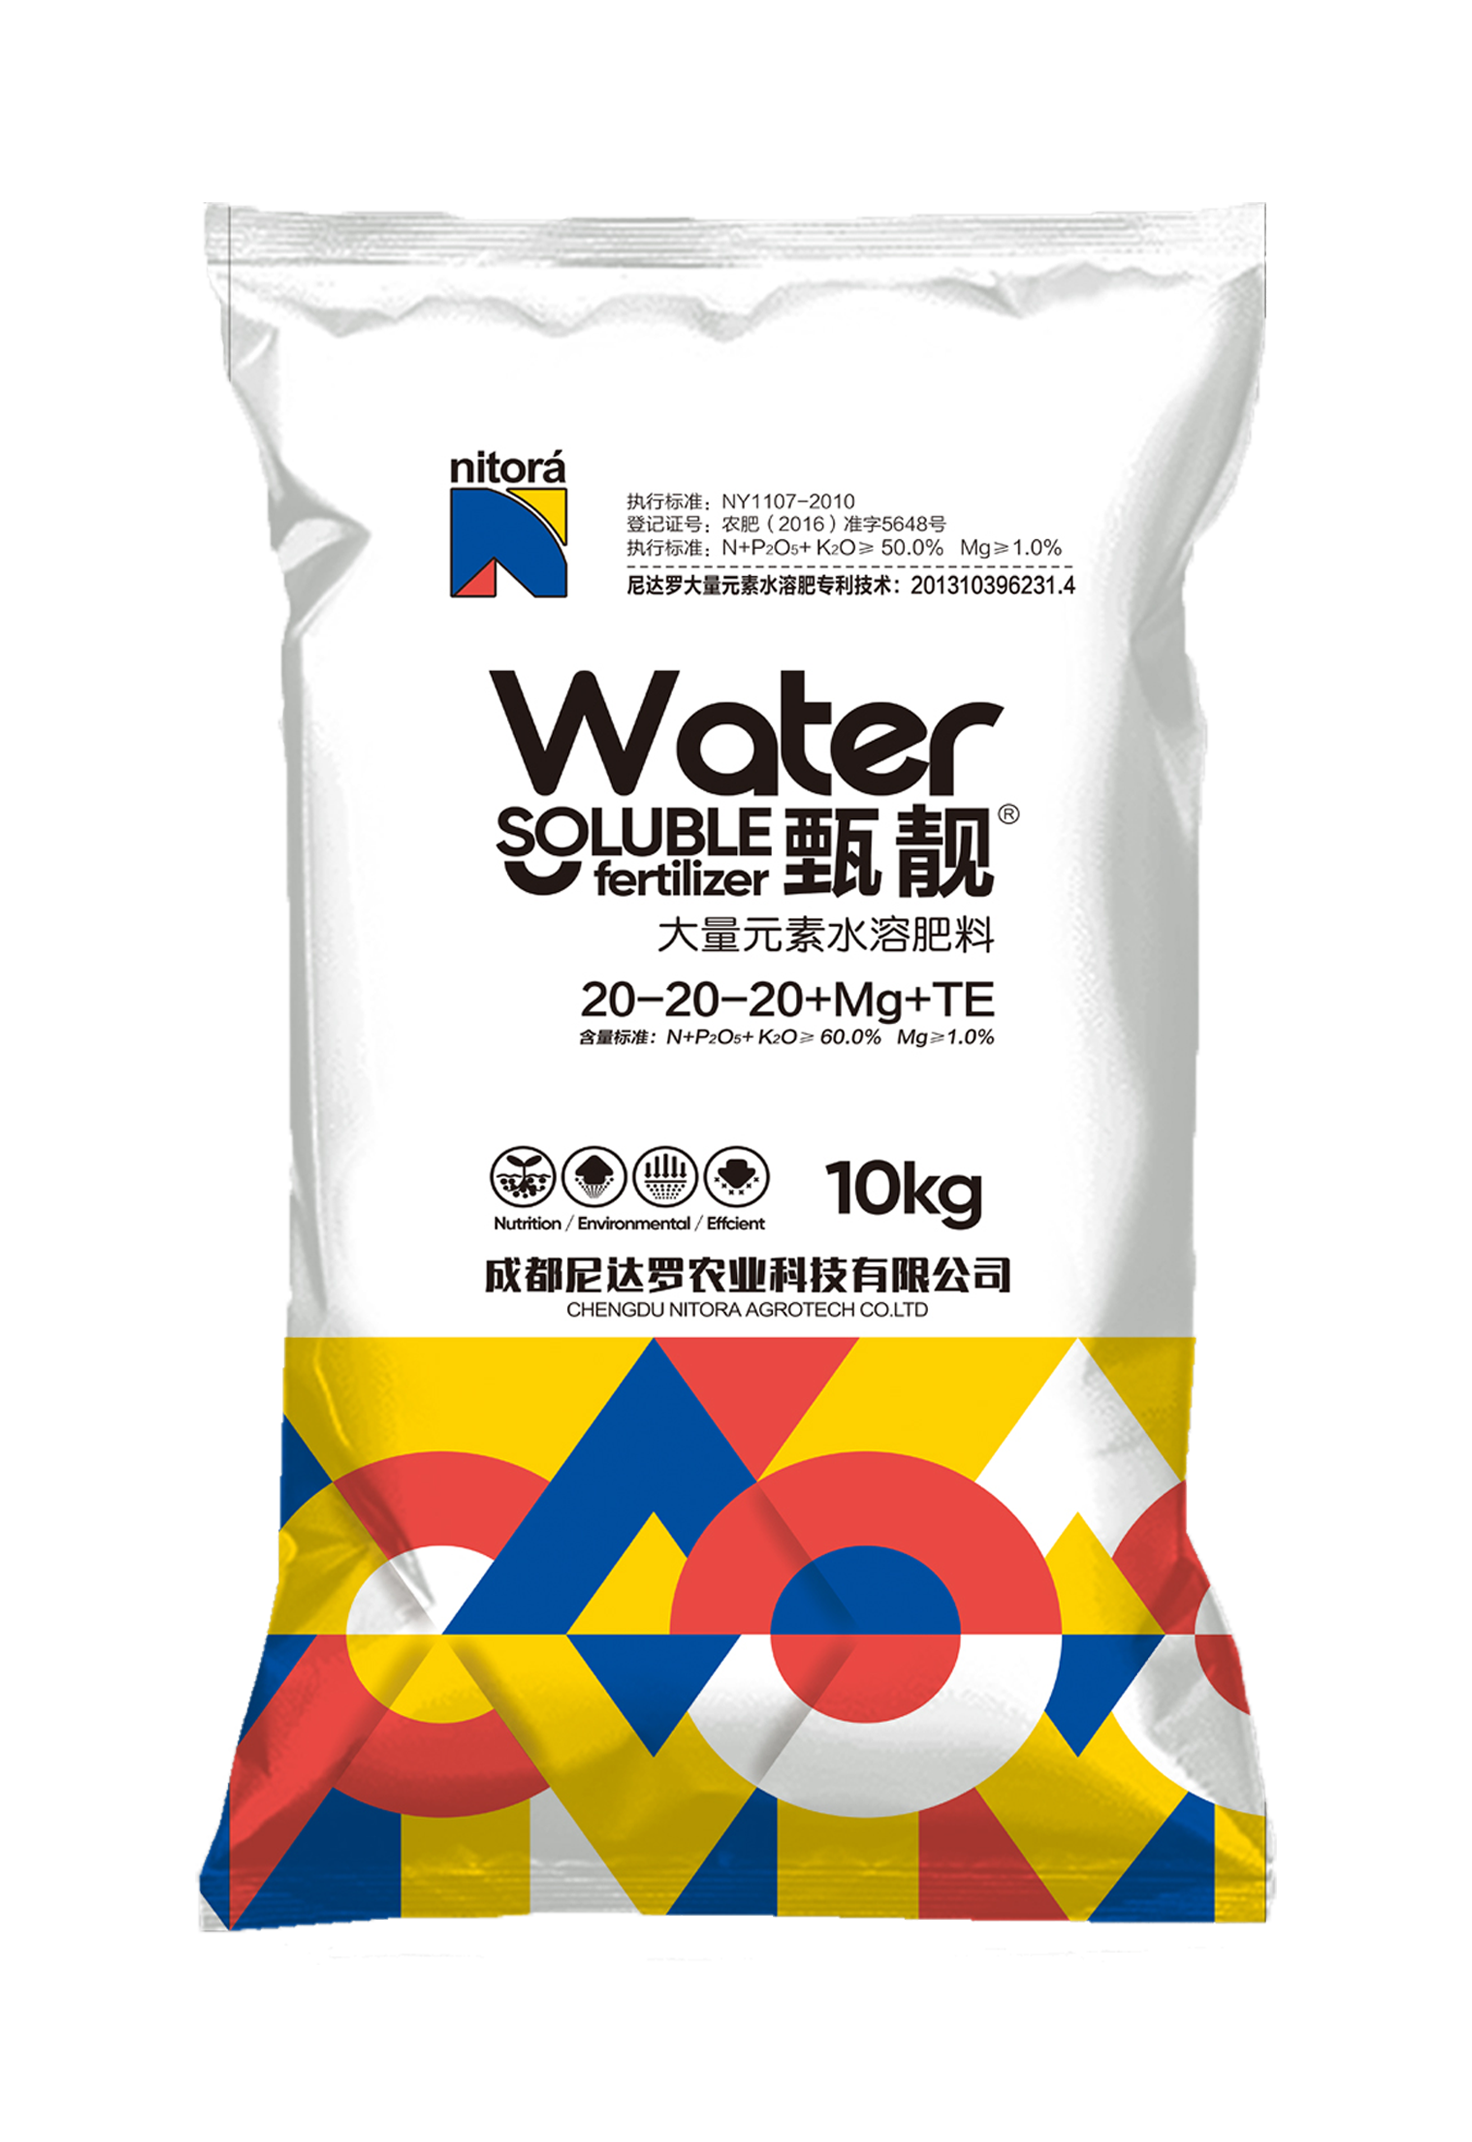 Zhen Liang a large number of elements water soluble fertilizer